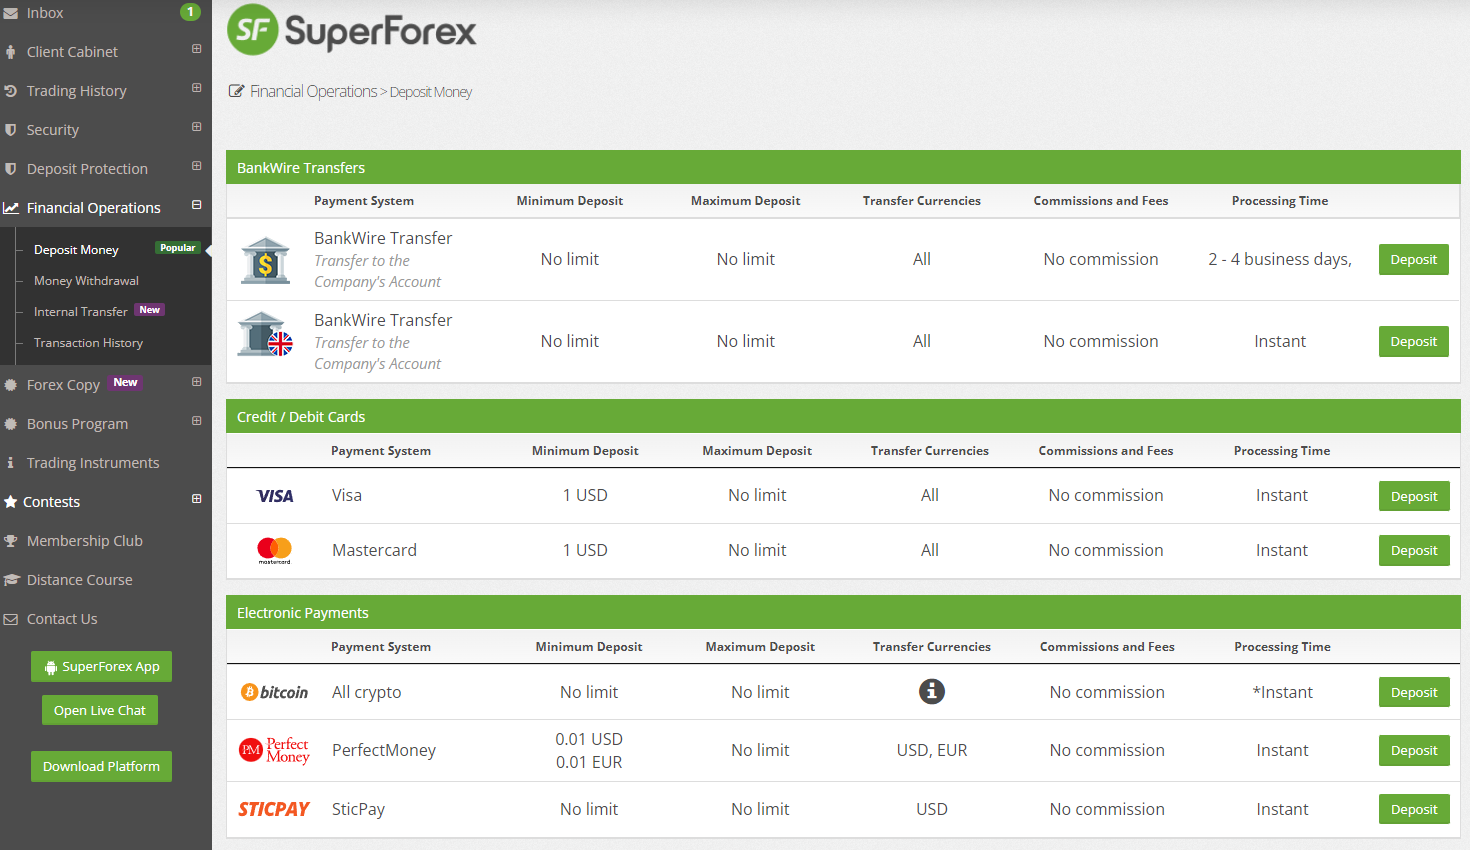 Review SuperForex - Financial Operations